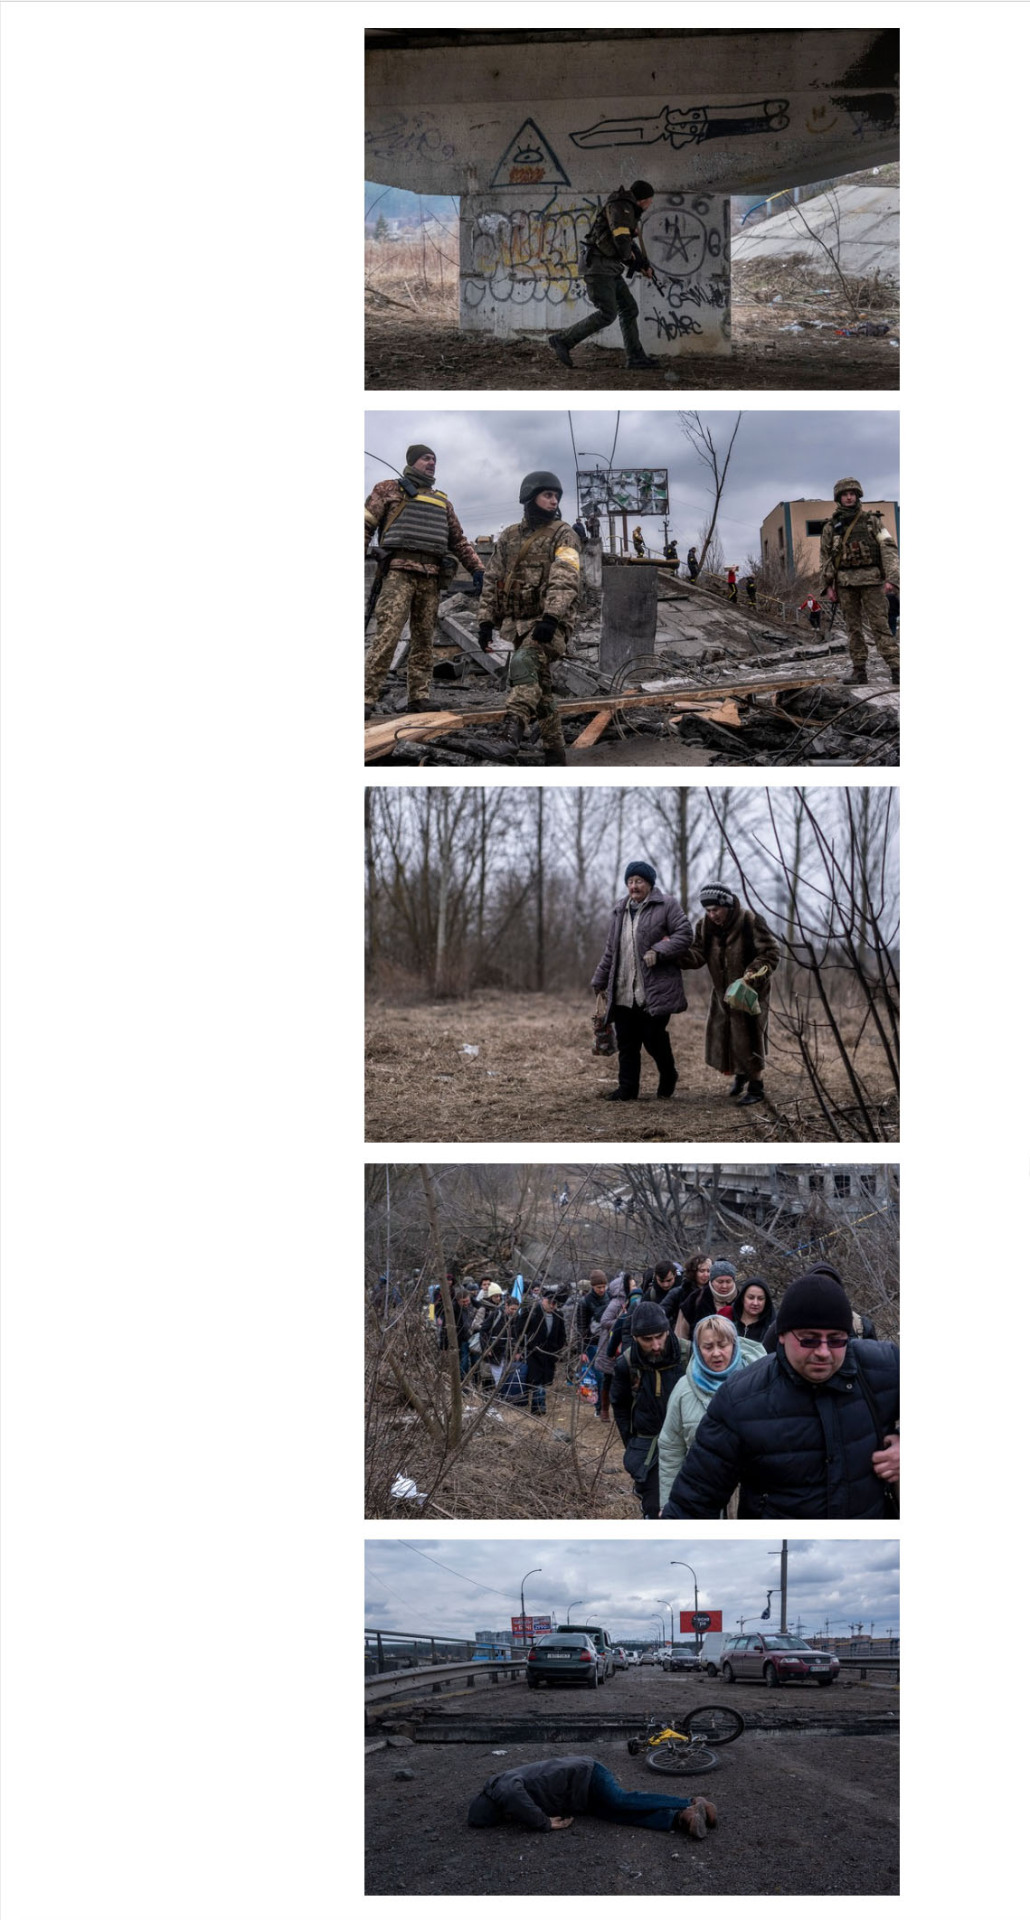 Photos by Ron Haviv / VII of Ukrainians fleeing the embattled city of Irpin during the Russian invasion of Ukraine. The Economist 1843 Magazine, March 17, 2022 issue.